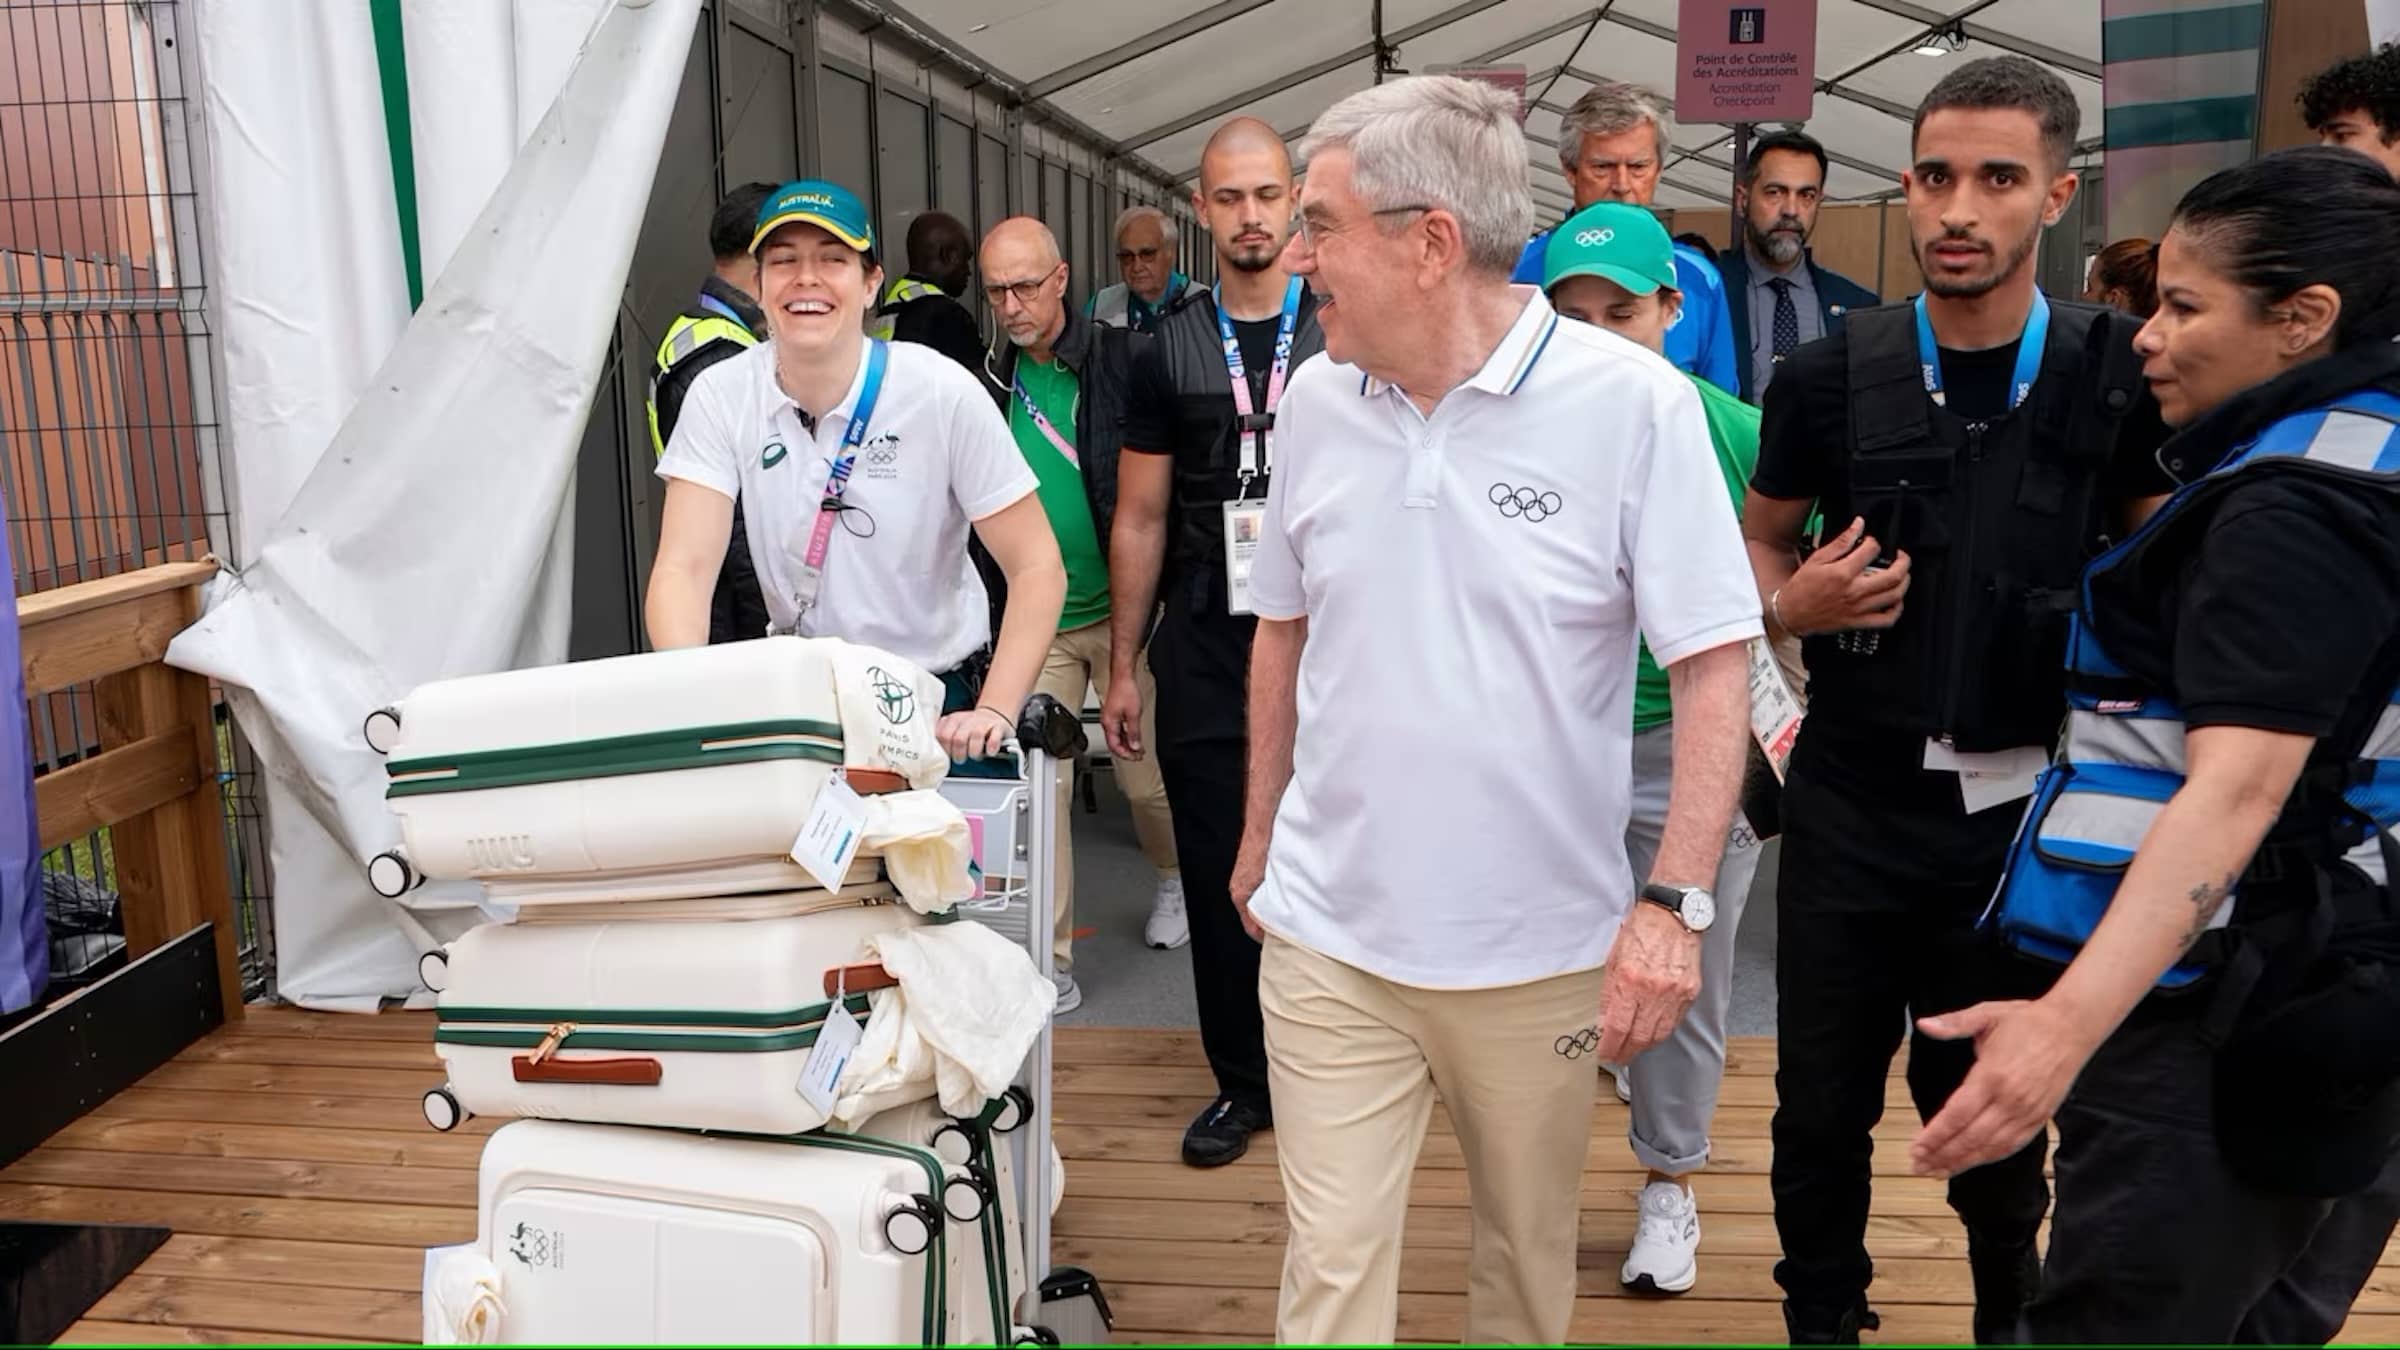 Paris 2024 welcomes first athletes as Olympic Village opens – IOC President Bach pays a visit